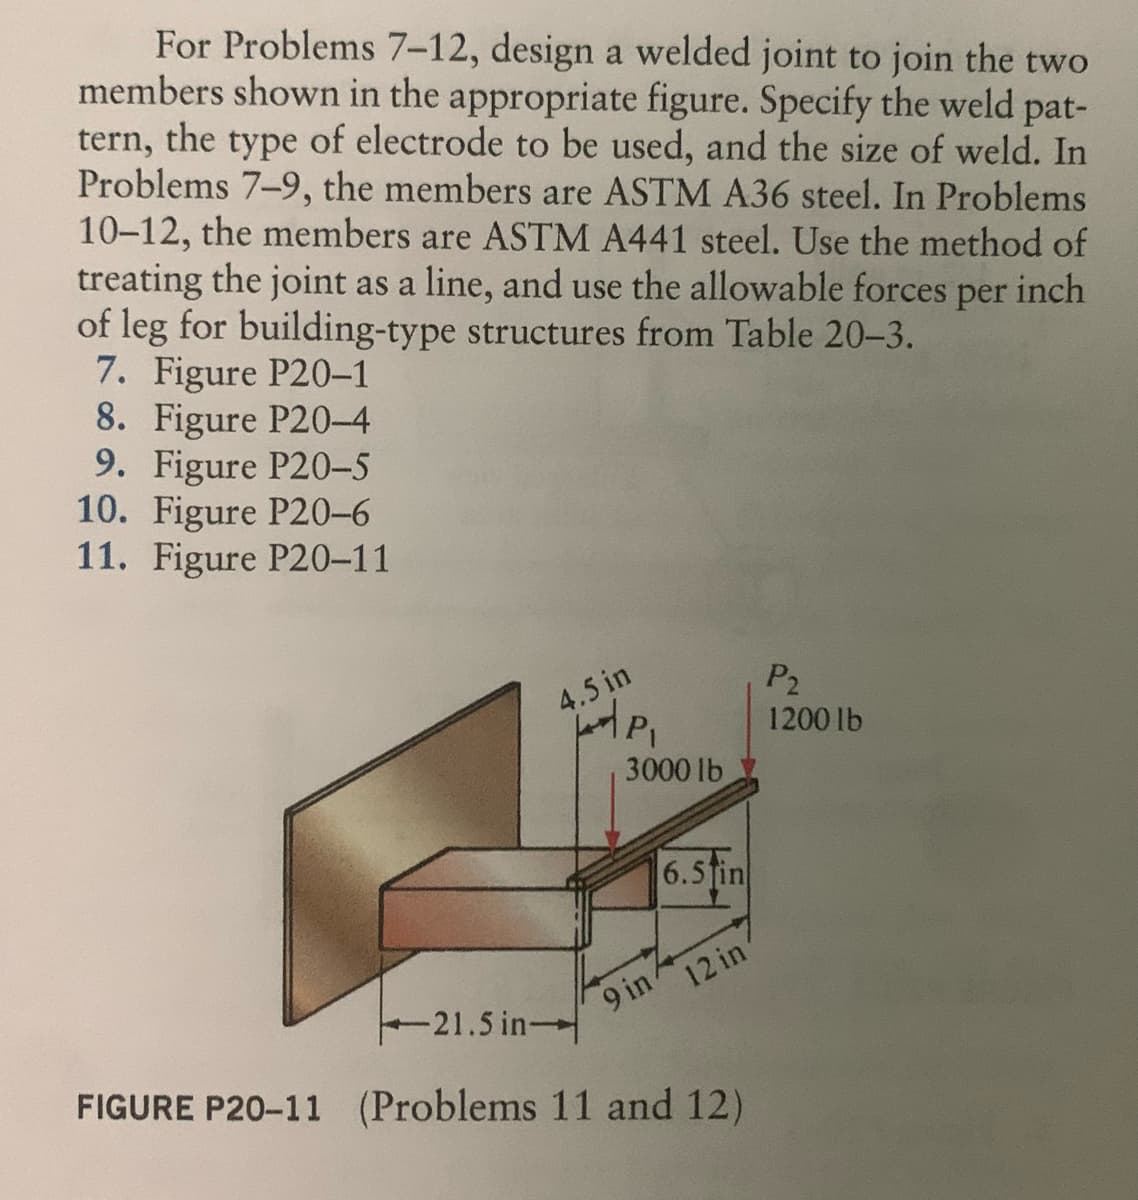 For Problems 7-12, design a welded joint to join the two
members shown in the appropriate figure. Specify the weld pat-
tern, the type of electrode to be used, and the size of weld. In
Problems 7-9, the members are ASTM A36 steel. In Problems
10-12, the members are ASTM A441 steel. Use the method of
treating the joint as a line, and use the allowable forces per inch
of leg for building-type structures from Table 20-3.
7. Figure P20-1
8. Figure P20-4
9. Figure P20-5
10. Figure P20-6
11. Figure P20-11
4.5 in
P₁
3000 lb
6.5in
9 in 4
12 in
21.5 in-
FIGURE P20-11 (Problems 11 and 12)
P₂
1200 lb